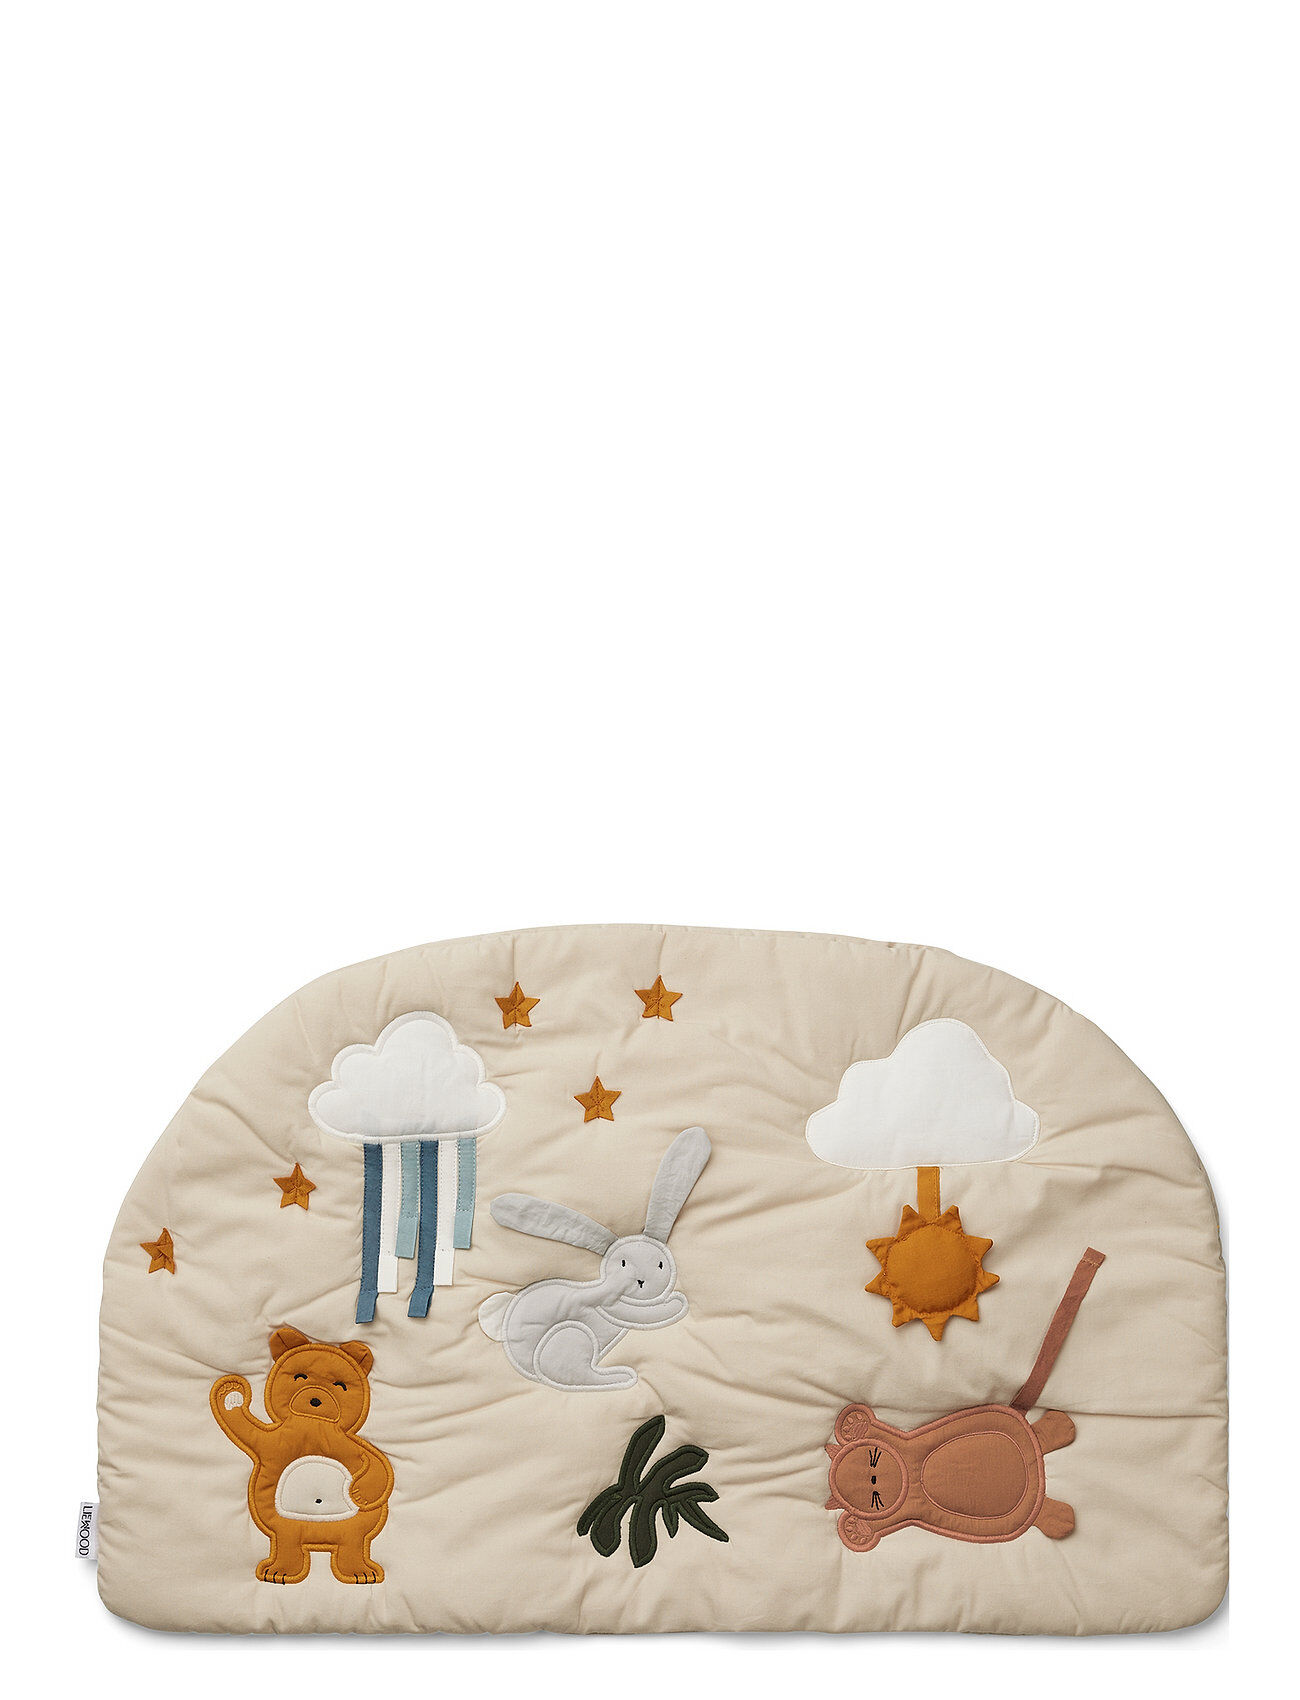 Liewood Sofie Activity Playmat Baby & Maternity Play Mats Multi/mønstret Liewood